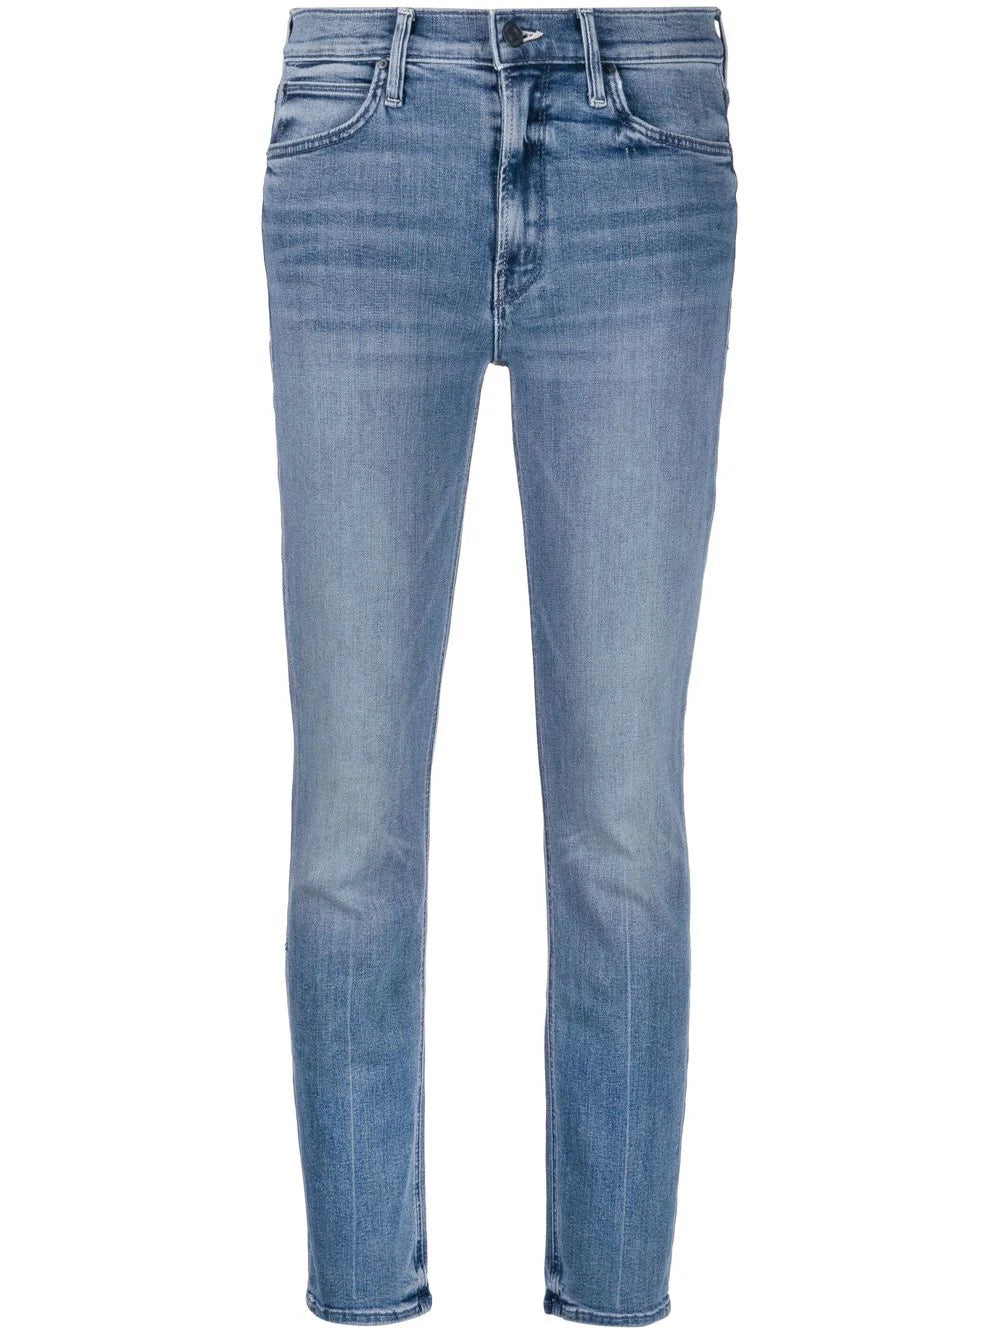 The Mid Rise Dazzler Ankle jeans, washed blue